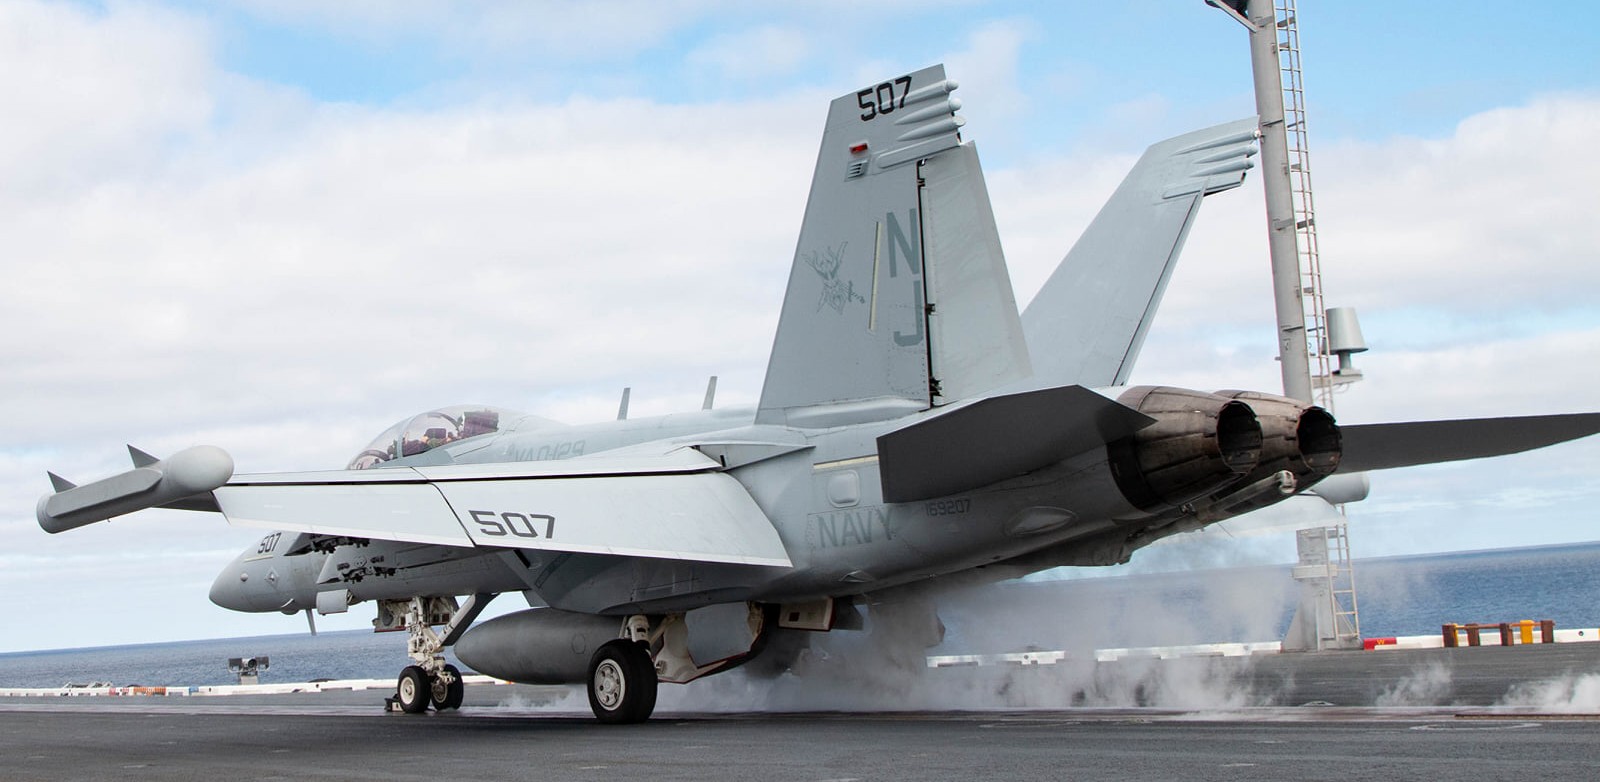 vaq-129 vikings electronic attack squadron fleet replacement frs us navy ea-18g growler 20